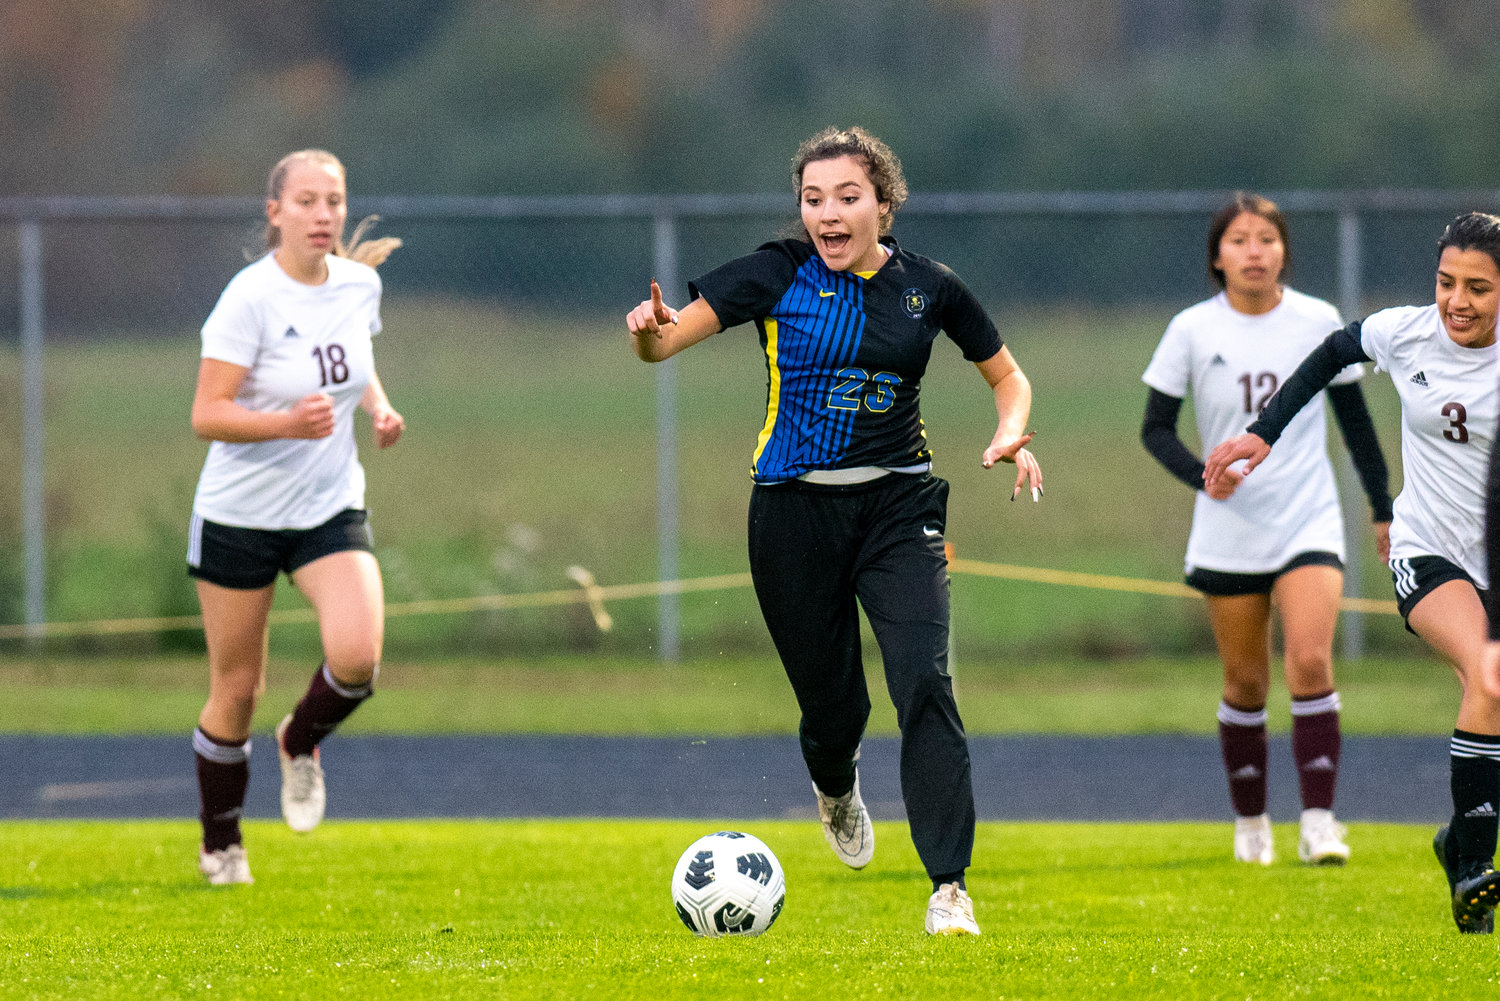 Adna senior Presley Smith (23) drives downfield against Raymond-South Bend on Oct. 13, 2021.